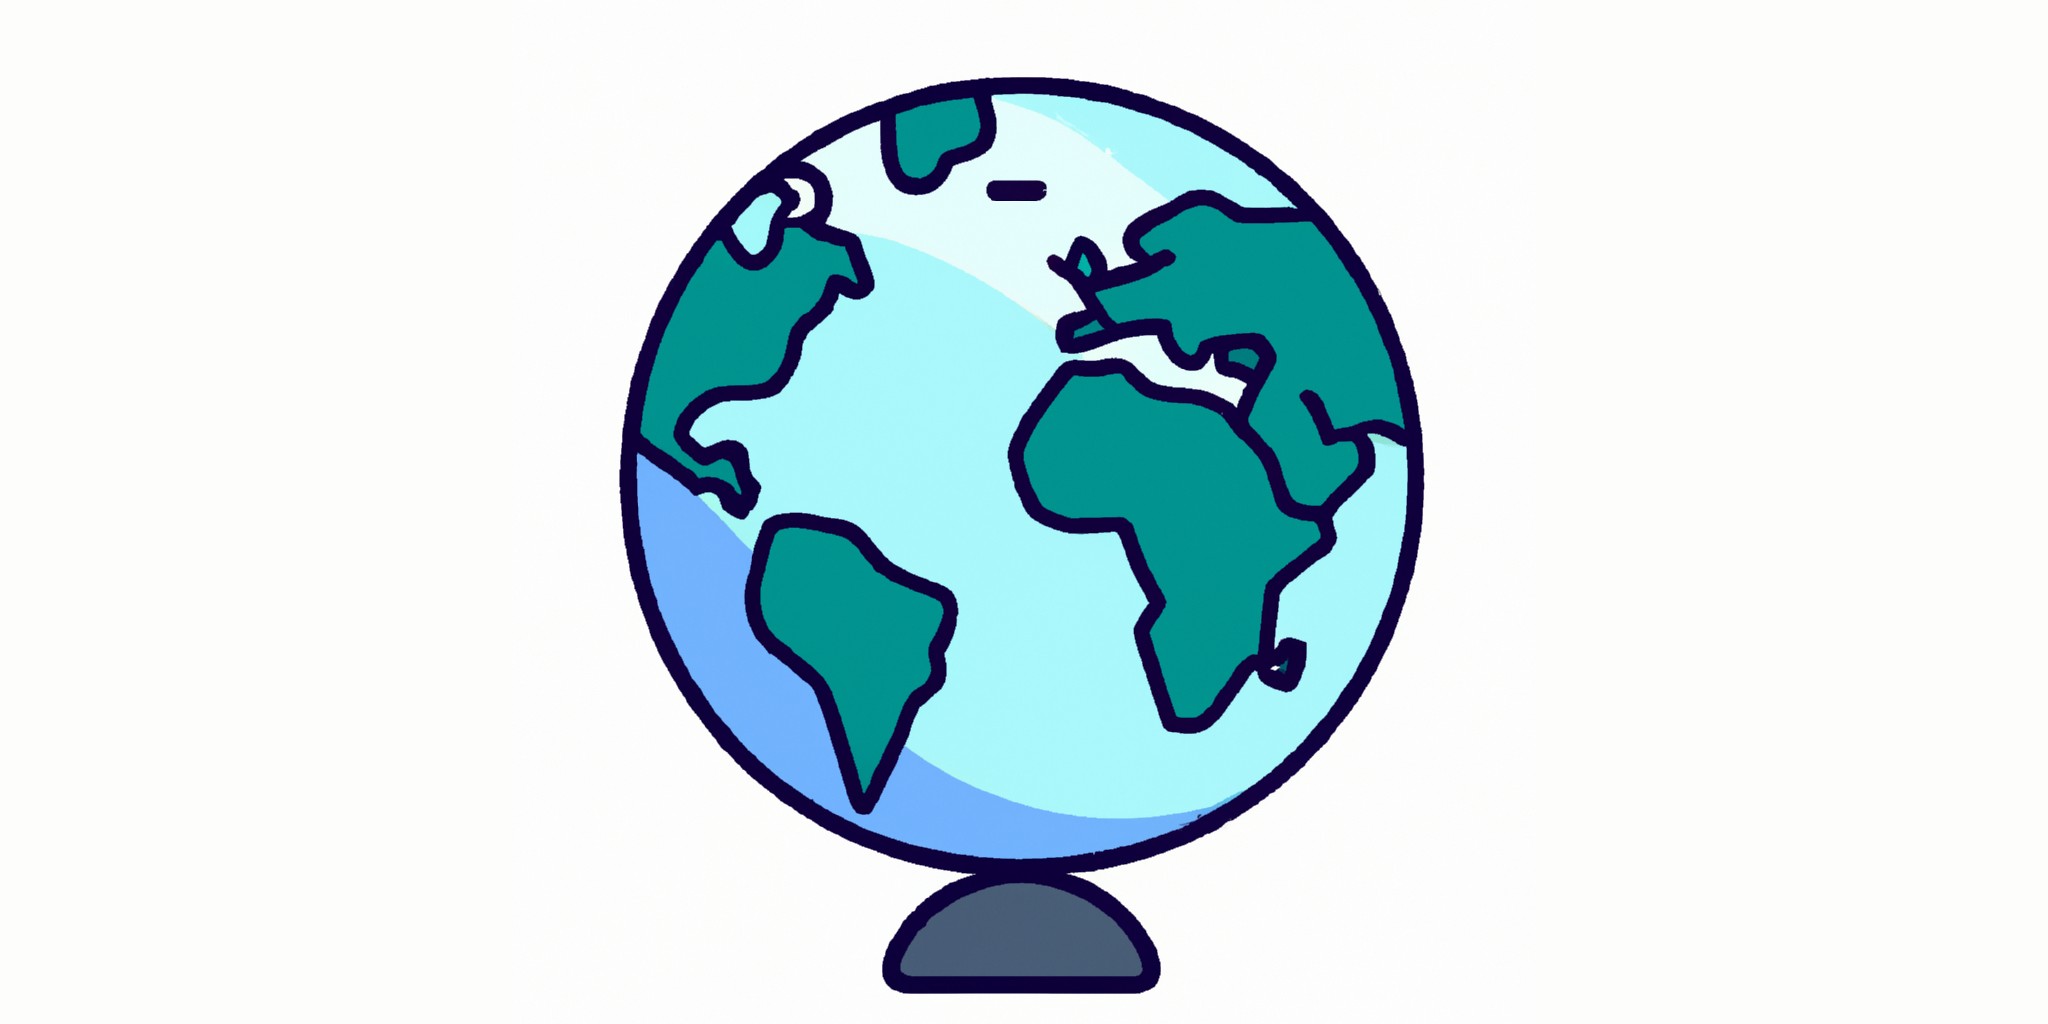 a globe in flat illustration style with gradients and white background